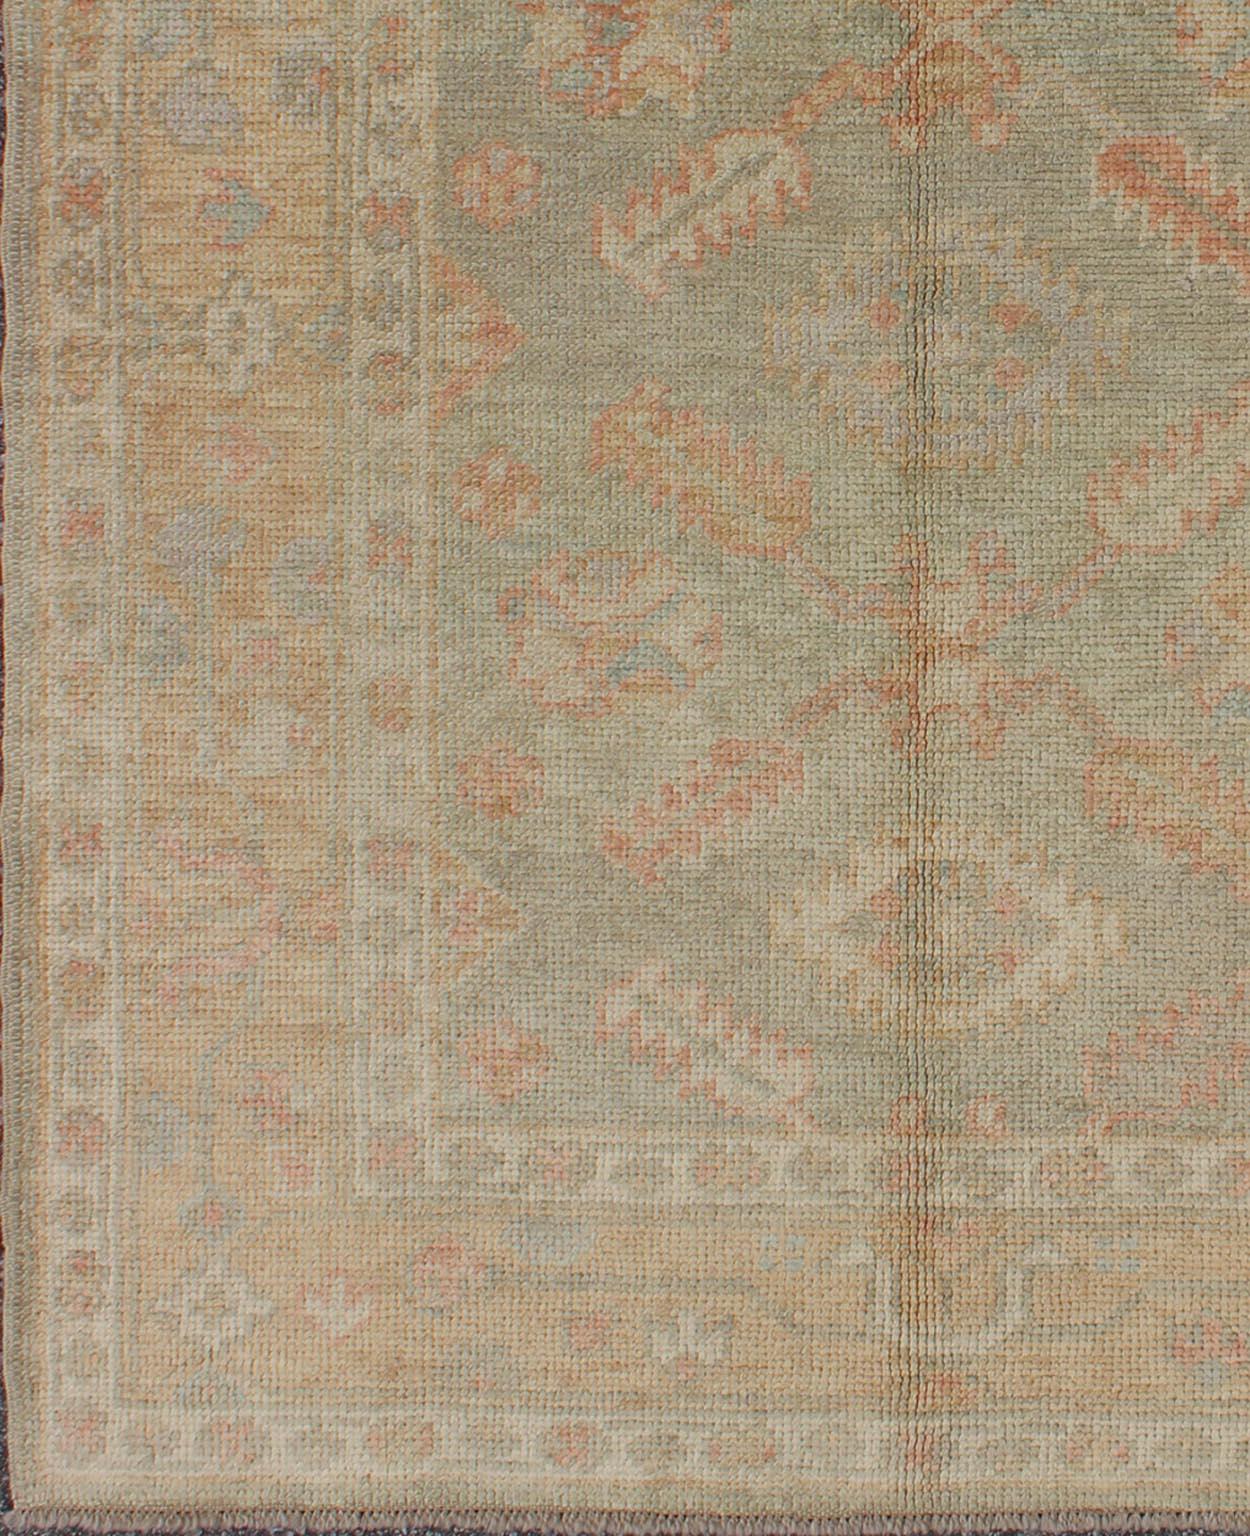 New Turkish Oushak rug with green and neutral color palette and all-over flower design, rug en-302, country of origin / type: Turkey / Oushak

This traditional Oushak rug from Turkey features a subdued, neutral color palette and an all-over design